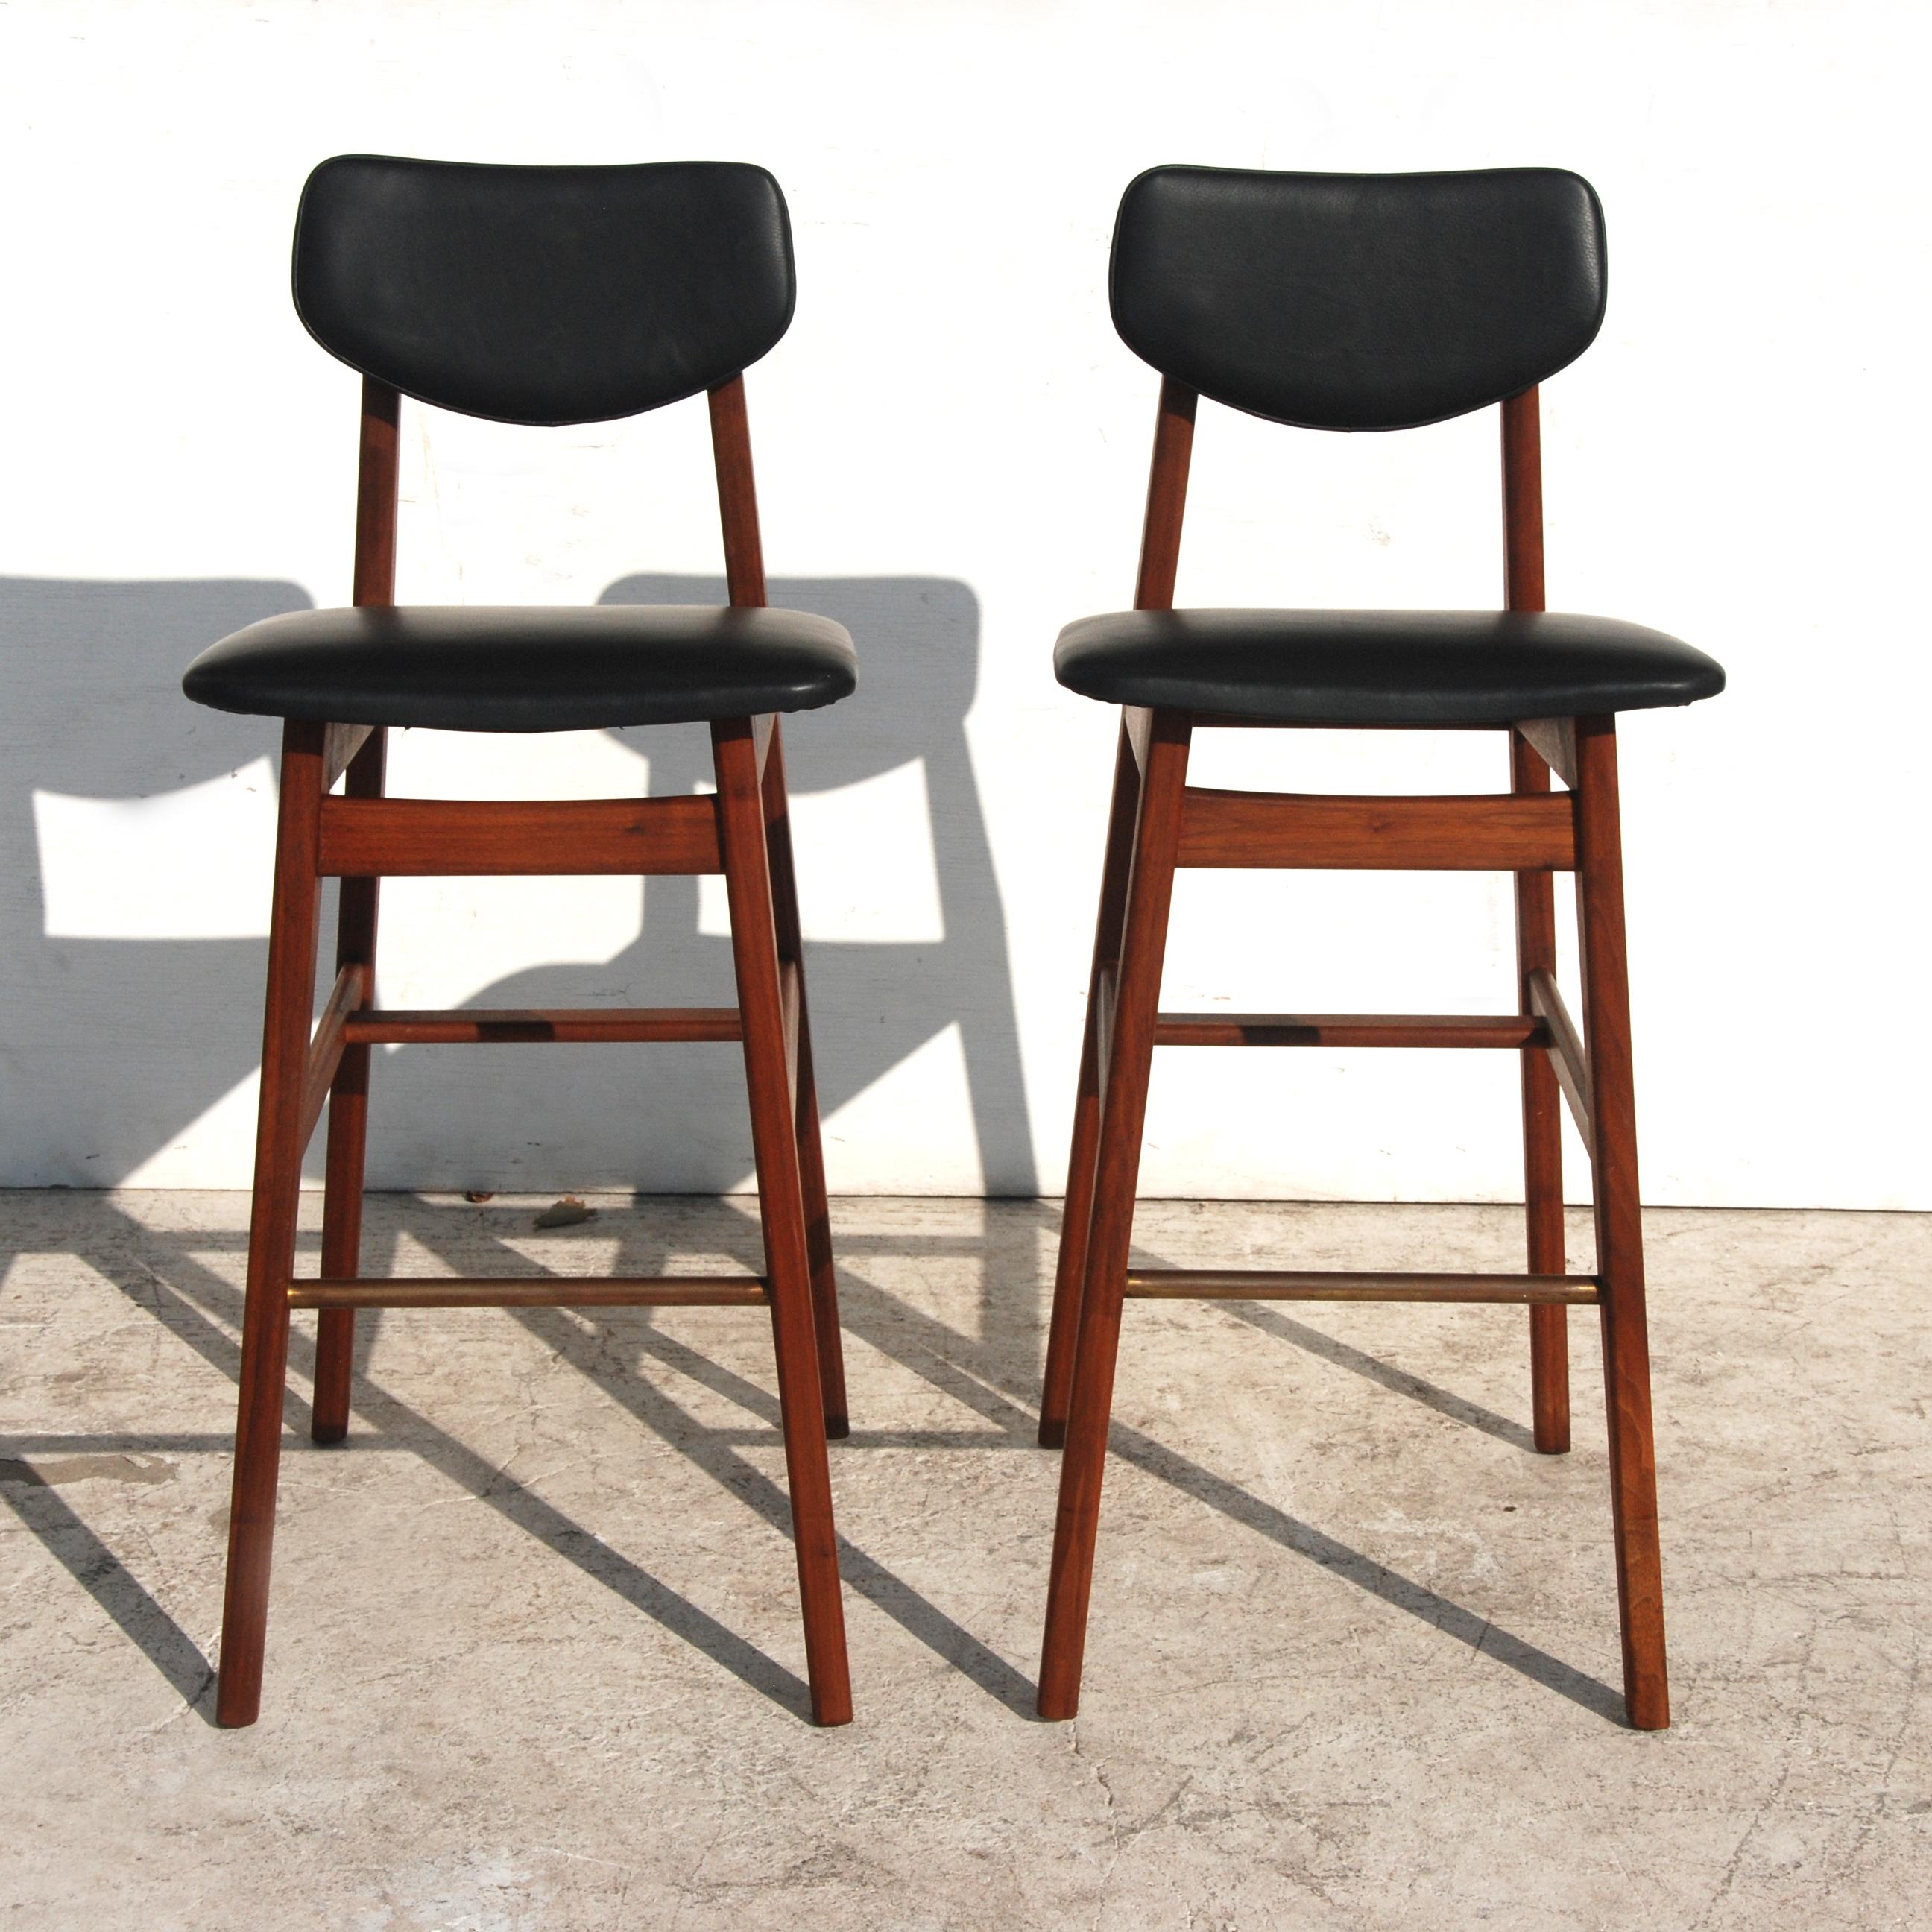 Pair of rare, iconic Jens Risom stools.
Teak with newly upholstered leather seats and backs
Brass foot rests.
27